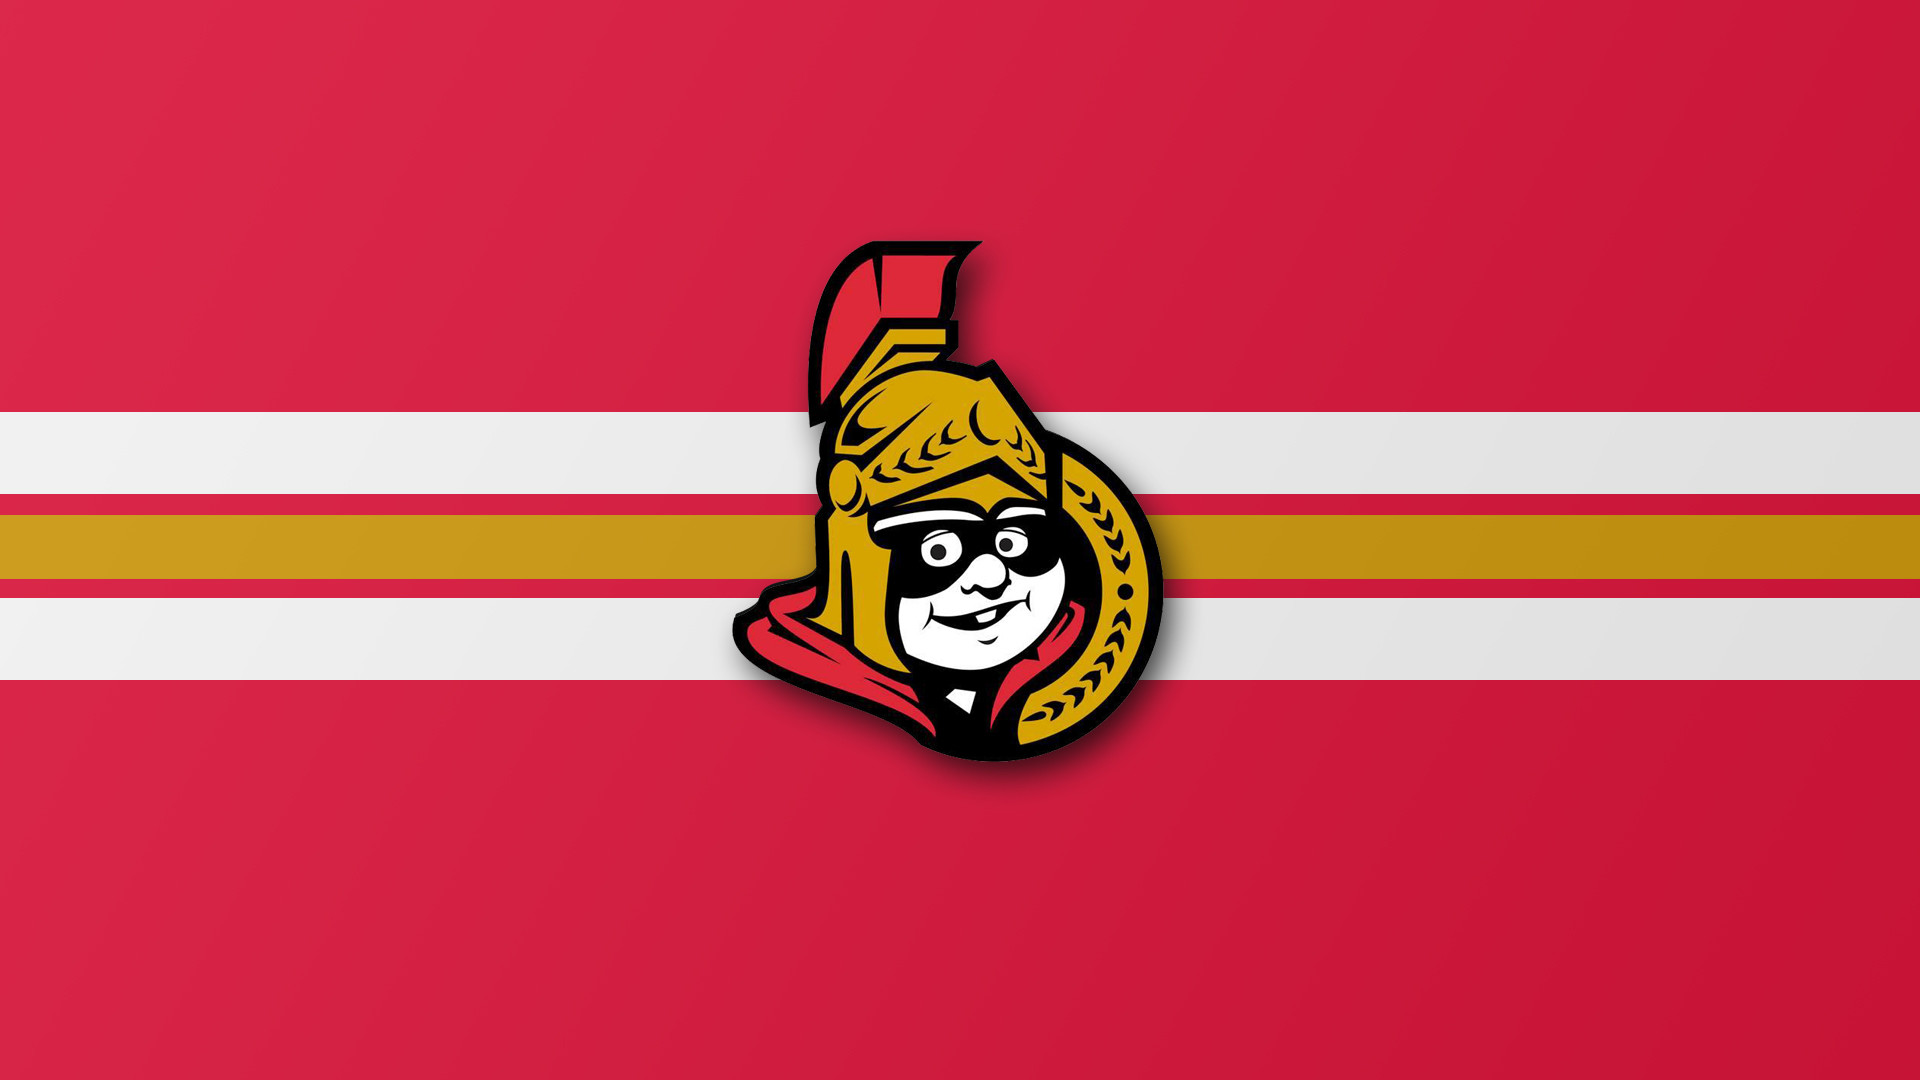 1920x1080 Turned the Hamburglar logo into a wallpaper! (iPhone version in comments)  ...